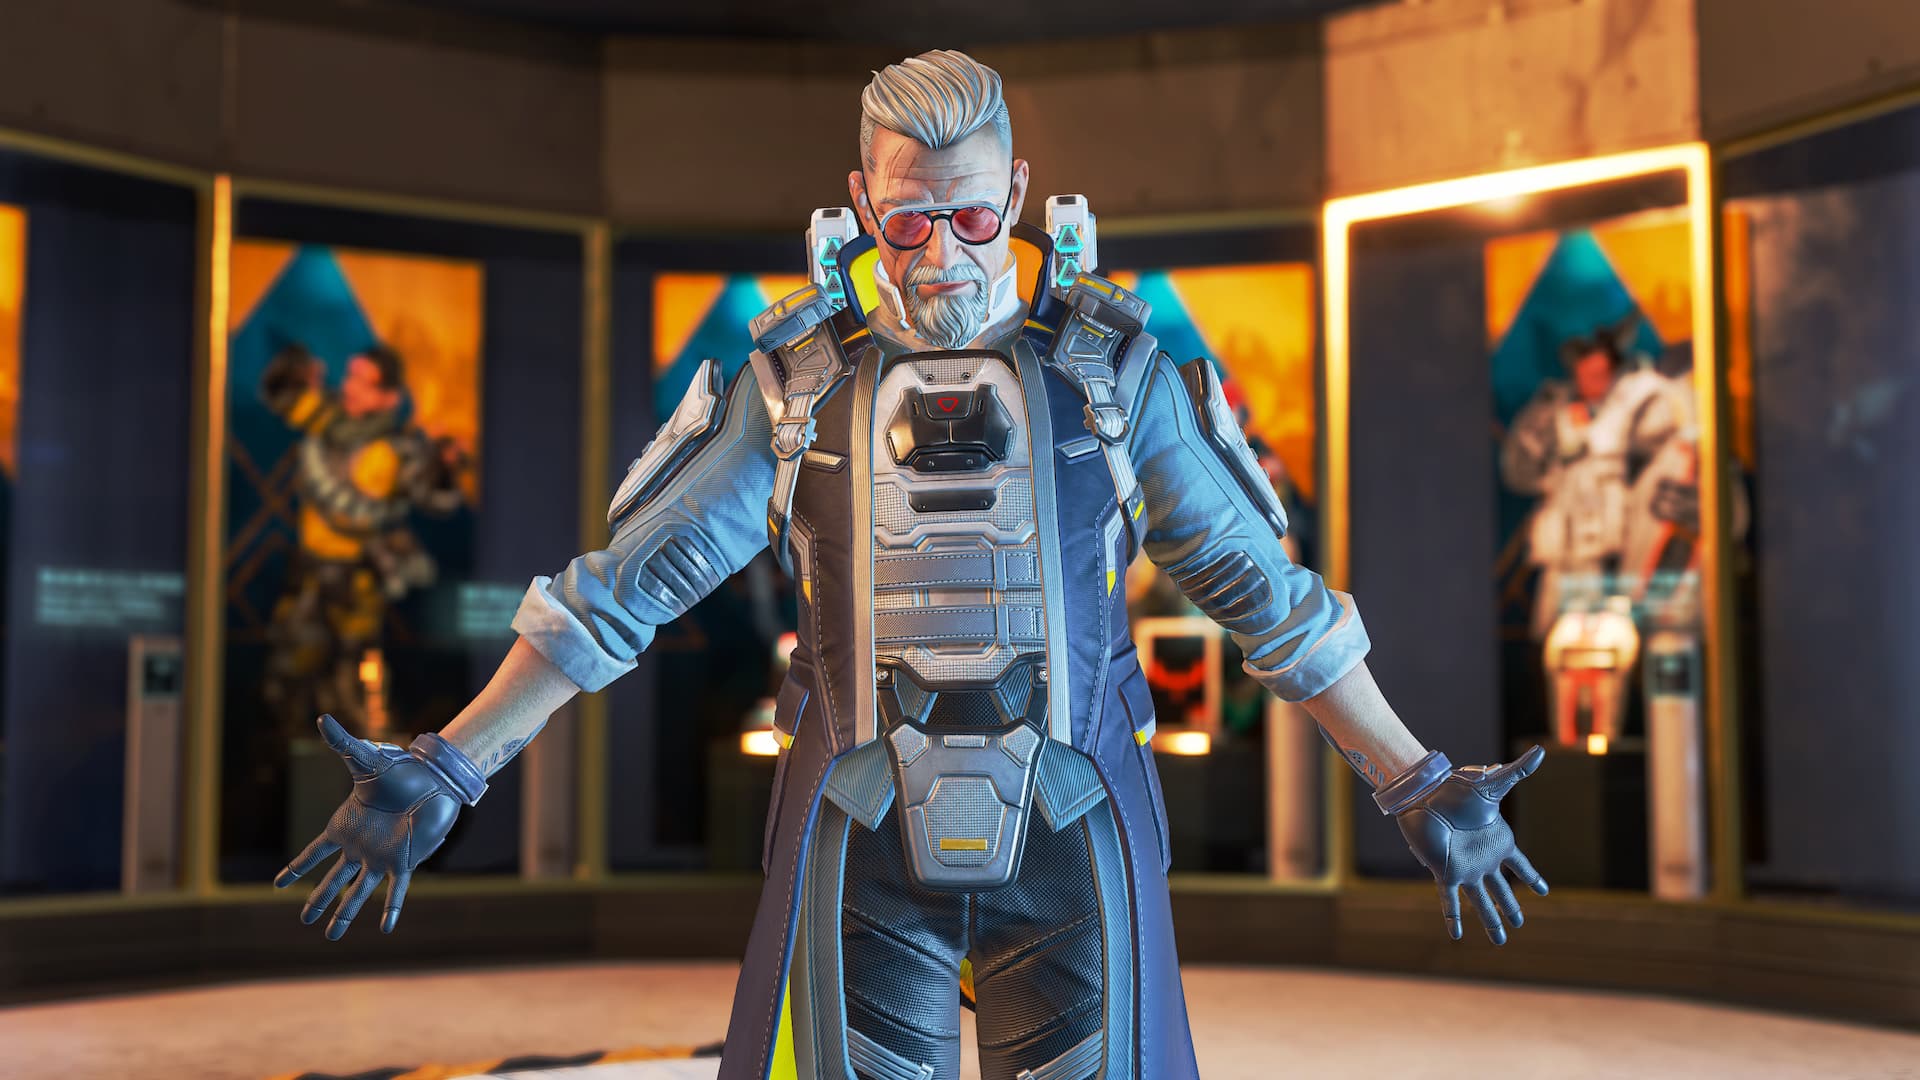 Apex Legends Ballistic abilities, bio, and playstyle